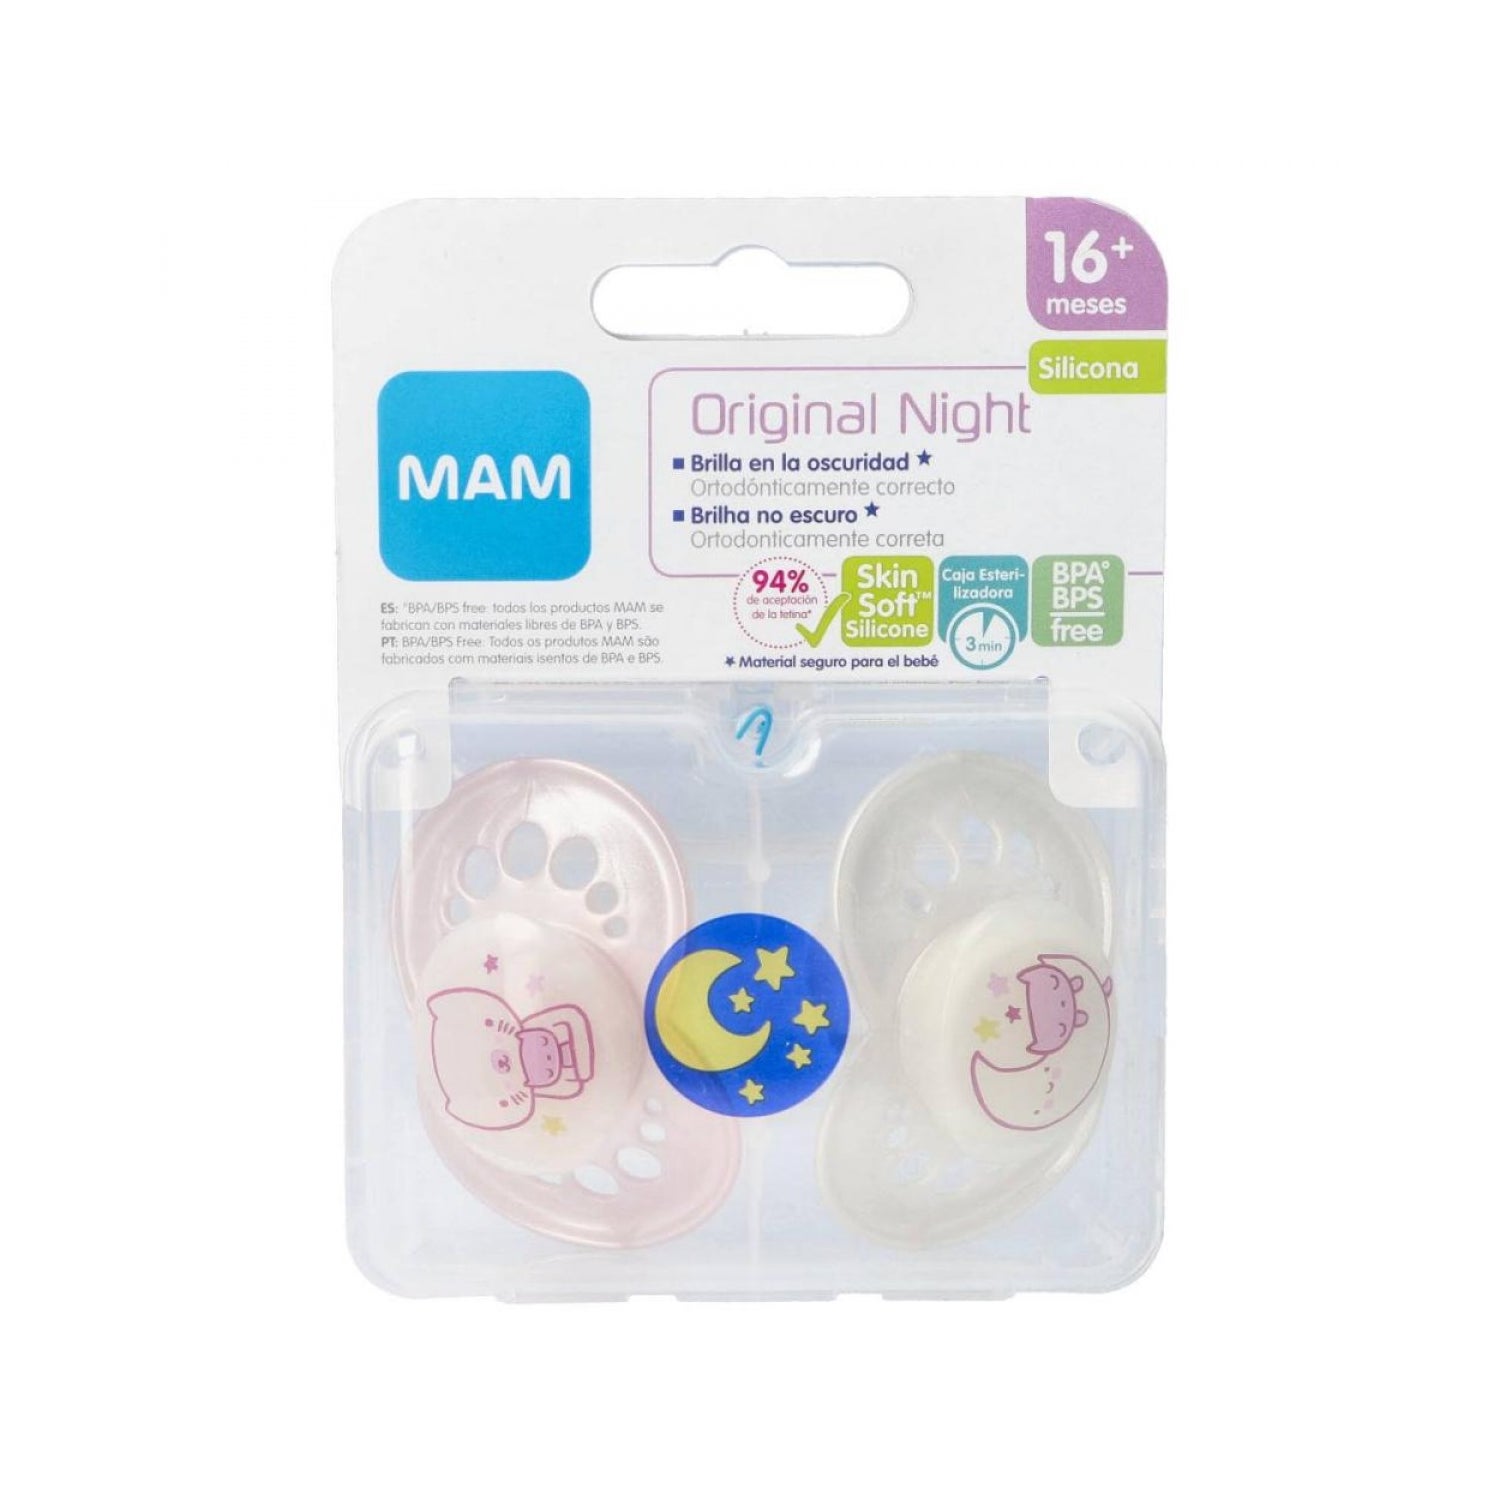 Mam Air Night Pack Chupete Silicona 16+ meses